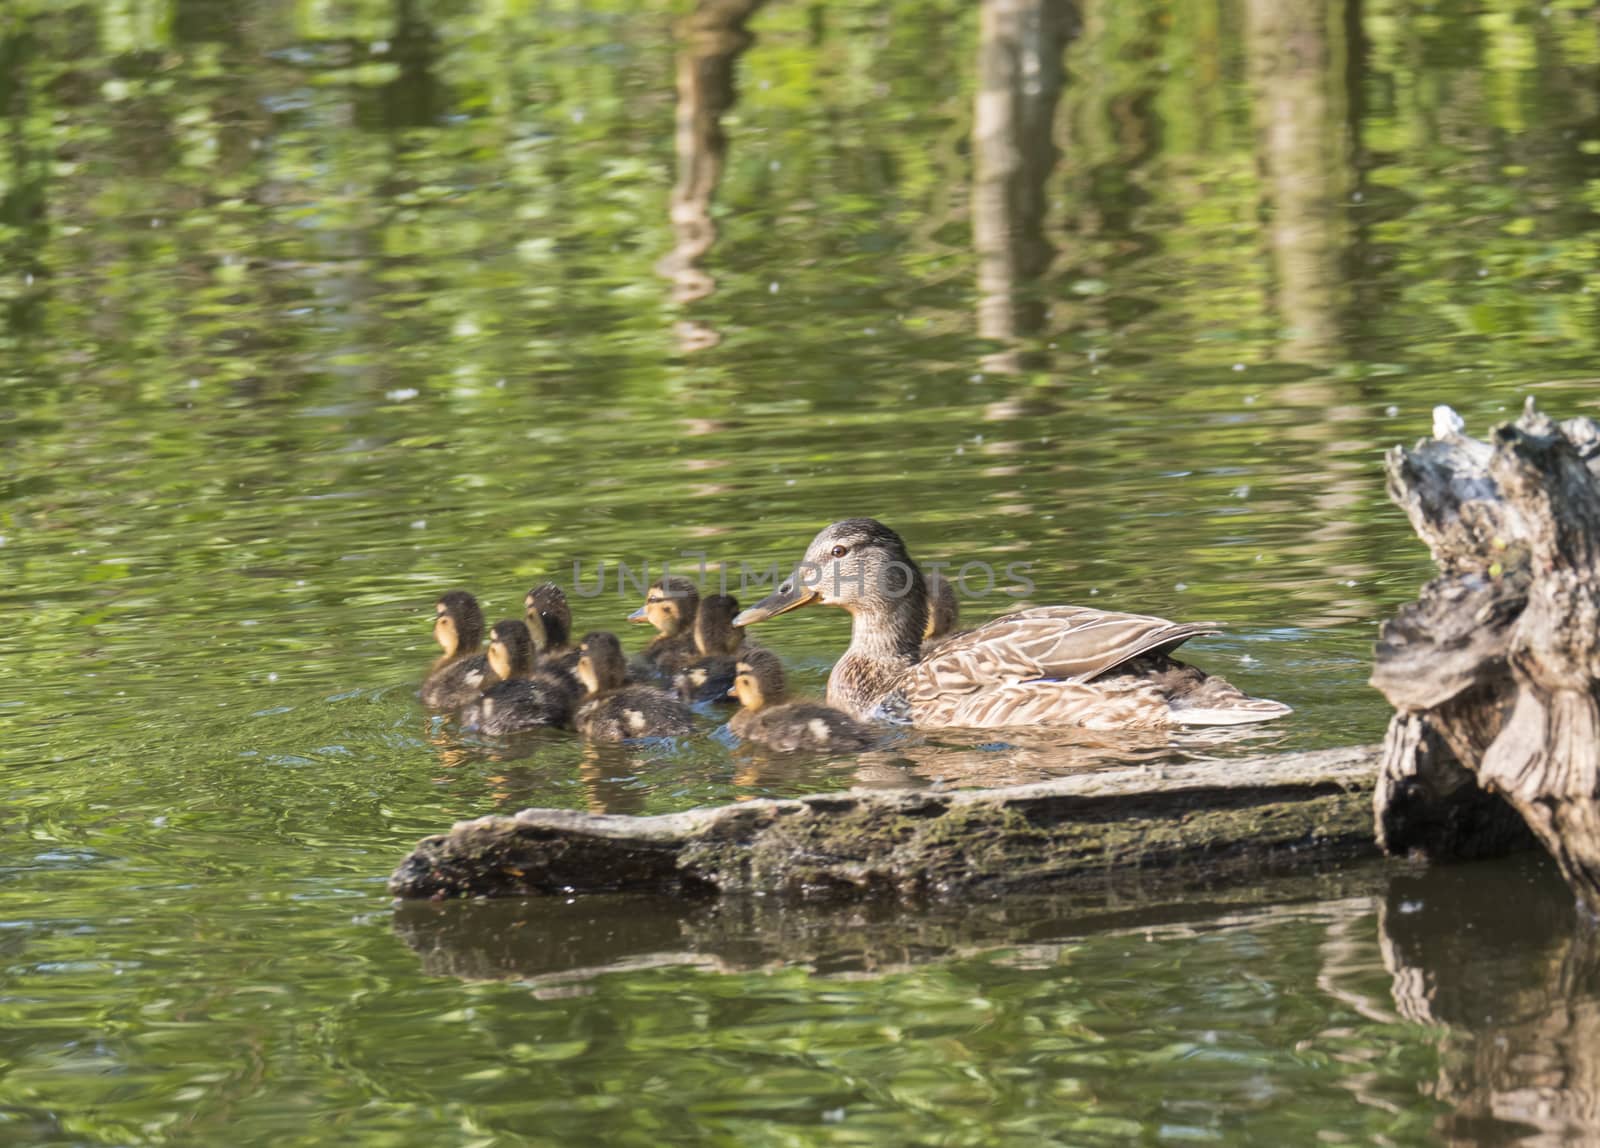 Wild Female Mallard duck with youngs ducklings. Anas platyrhynchos. Beauty in nature. Spring time golden hour. Birds swimming on green lake. Young ones